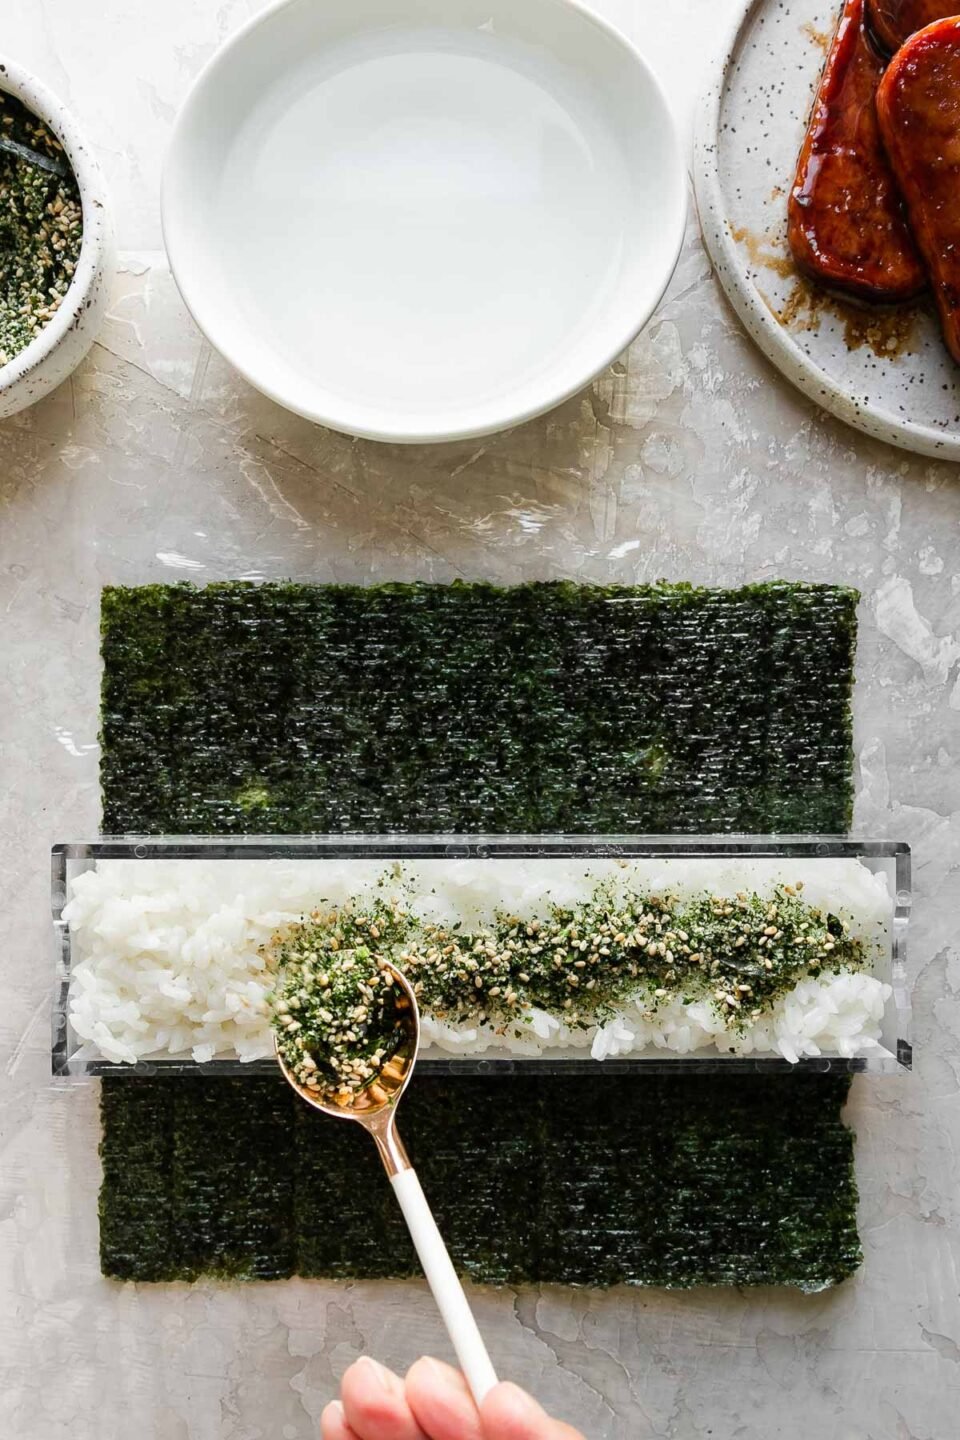 A close up of a woman's hand holding a white and gold spoon to sprinkle a generous amount of furikake seasoning atop a rice filled outer box of a double musubi mold. The musubi mold rests atop a single sheet of sushi nori arranged on a piece of plastic wrap atop a creamy white textured surface. Resting above the nori & the musubi mold is a small bowl filled with furikake seasoning with a spoon resting inside, another small white bowl filled with water, and a small speckled ceramic plate with pan-fried teriyaki Spam.